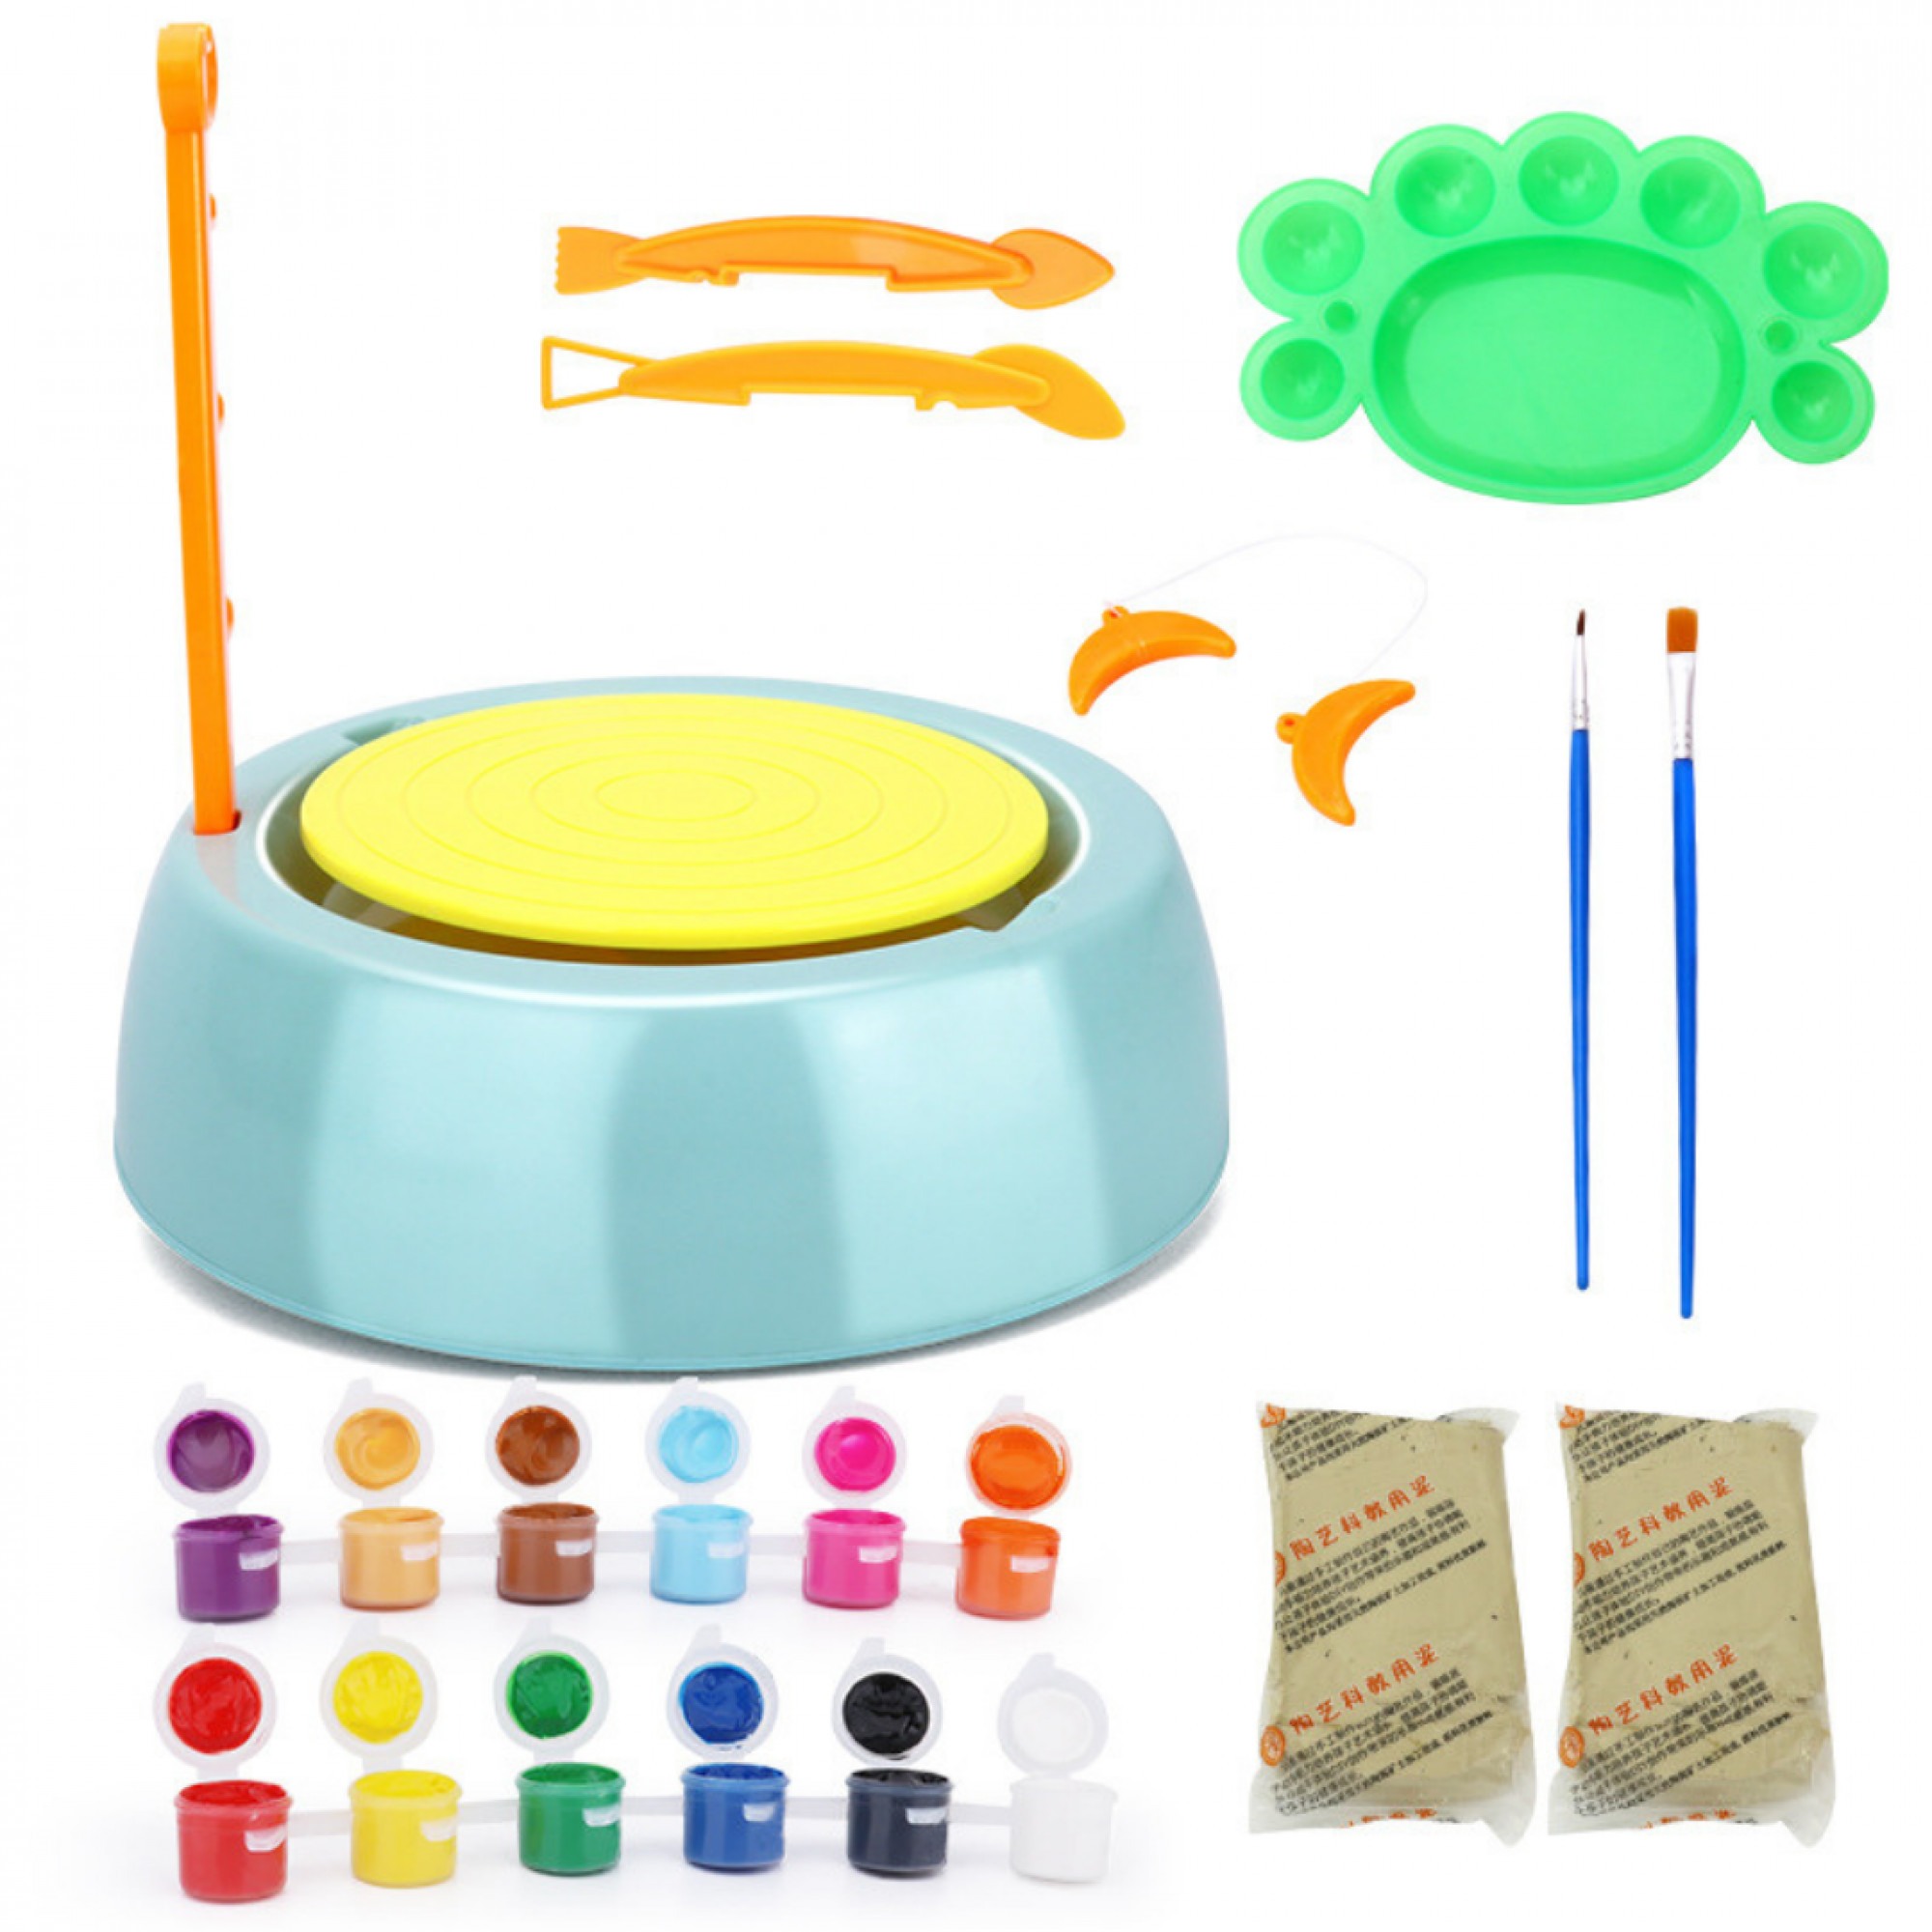 BEGINNERS POTTERY WHEEL KIT FOR KIDS WITH CLAY PAINTS AND TOOLS